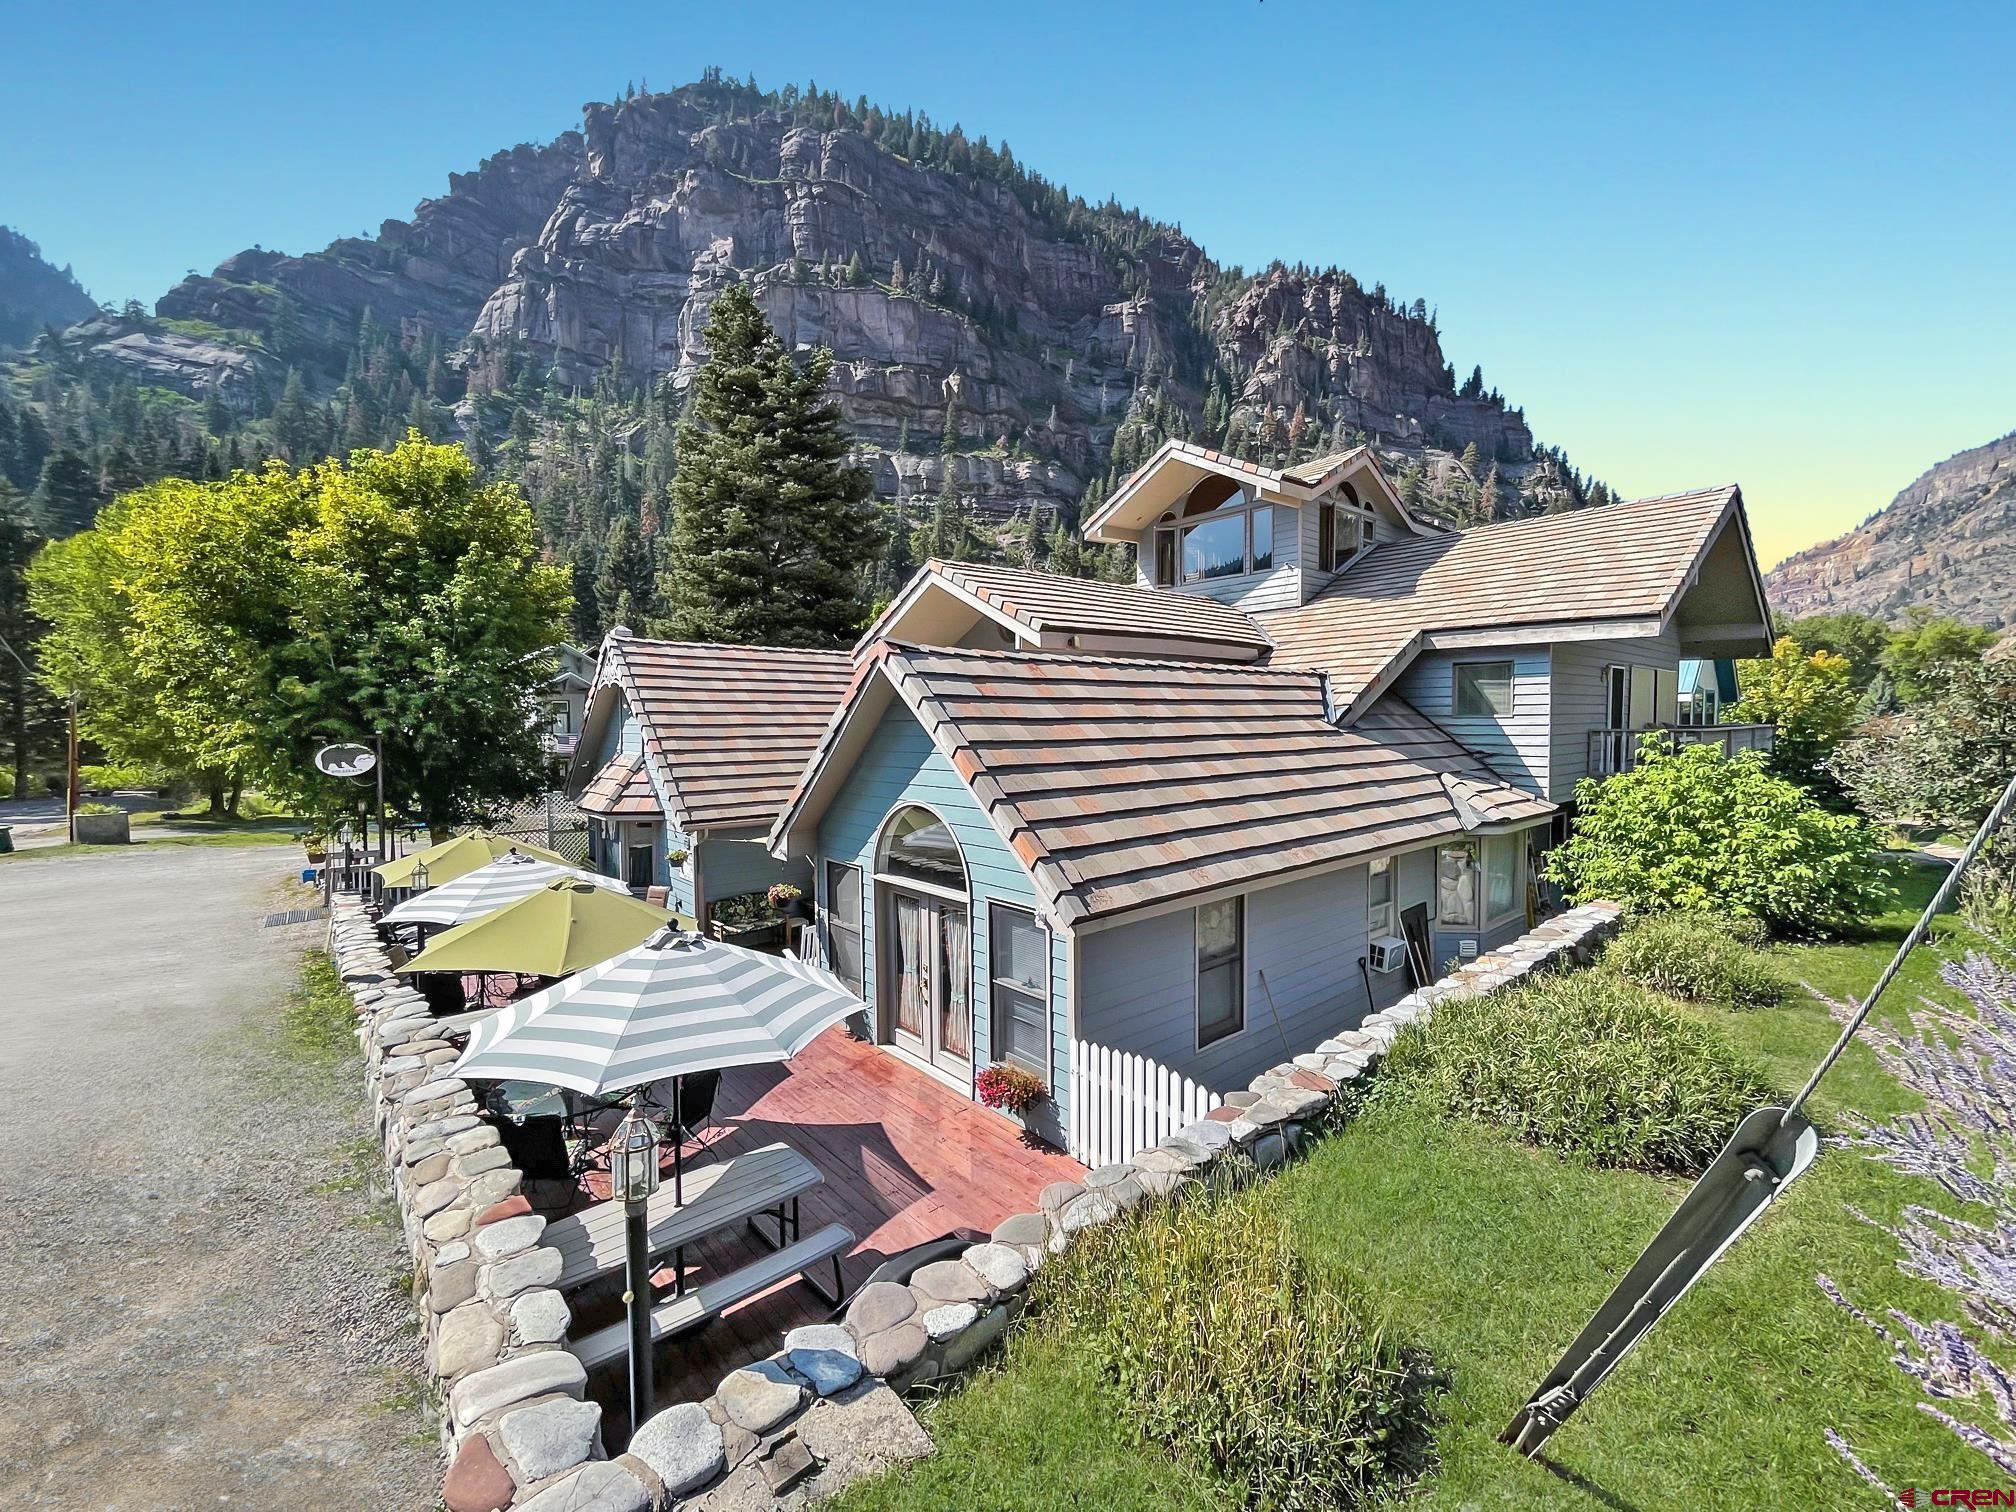 11% CAP rate in 2021!   Live/Work/Invest in beautiful Ouray.   9 diverse guest rooms spread across two floors with private bathrooms and direct access to the outside plus spacious common areas and onsite owner/manager quarters.   Almost 5000 livable square feet on a large lot with wrap around decks and a big basement. A premium quiet location just 200 feet from the Uncompahgre River 2 blocks from Main Street in downtown Ouray.   Purpose built as a Bed & Breakfast (not a retro fitted house), the Black Bear Manor is recording record occupancy & revenue numbers in 2021. Business & real property now offered turn-key ready and fully furnished with everything necessary for a smooth take over.   Offered at only $319 PER FINISHED SQUARE FOOT - a tremendous value for an asset of this size and location.  The Black Bear Manor B&B has a solid history of stellar reviews, including a 5 Star Rating and a Certificate of Excellence from TripAdvisor. Repeat guests are common and updated books supports asking price with a strong CAP.   Center of town location on 6th Avenue makes for an easy walk to downtown shopping and restaurant district, as well as the new Ouray Via Ferrata and the world-famous Ouray Ice Park.   This property features:  • 1696 sq. ft. wrap-around deck with picnic tables, a porch swing, umbrellas, café-style outdoor seating, and a 24-hour guest hot tub.  • 3rd Floor Observatory/game room provides a panoramic view of the surrounding cliffs and mountain peaks, including the Amphitheater, Mt. Hayden, US Mountain and Mt. Abrams, just to name a few.  • On-site and off-site parking. • 100-year multicolored, concrete tile roof. • Nine fully furnished, uniquely decorated guest rooms, some with fireplaces and whirlpool tubs.  • Owner/Manager quarters could be converted into a 10th guest room if so desired. • All rooms feature their own private bathroom and external entrance for convenience and easy ingress/egress. • Owner/Manager quarters could be converted into a 10th guest room if so desired • Large laundry Room with Commercial Dryer • Large basement for storage, a workshop, or future expansion. • Kitchen features a gas Viking stove, complete with dual ovens and a griddle, making this a baker’s dream. Large freezer, baker’s rack, commercial refrigerator, and pantry with additional storage. • Many upgrades, including new flooring, window coverings, updated boiler and plumbing, just to name a few.  This business is a TURN KEY OPERATION, with the opportunity to generate increased revenue through multiple avenues.   At full asking price of $1,595,000 the Black Bear Manor is being offered at only $319 per finished square foot - a TREMENDOUS VALUE for a large asset in a central downtown location.  Click on the Matterport 3-D virtual walk-through in the link below to see all guest rooms and common areas.  Nothing beats seeing it in person...contact Broker to arrange your personal tour and see the beauty of Ouray for yourself.  You won't regret it!